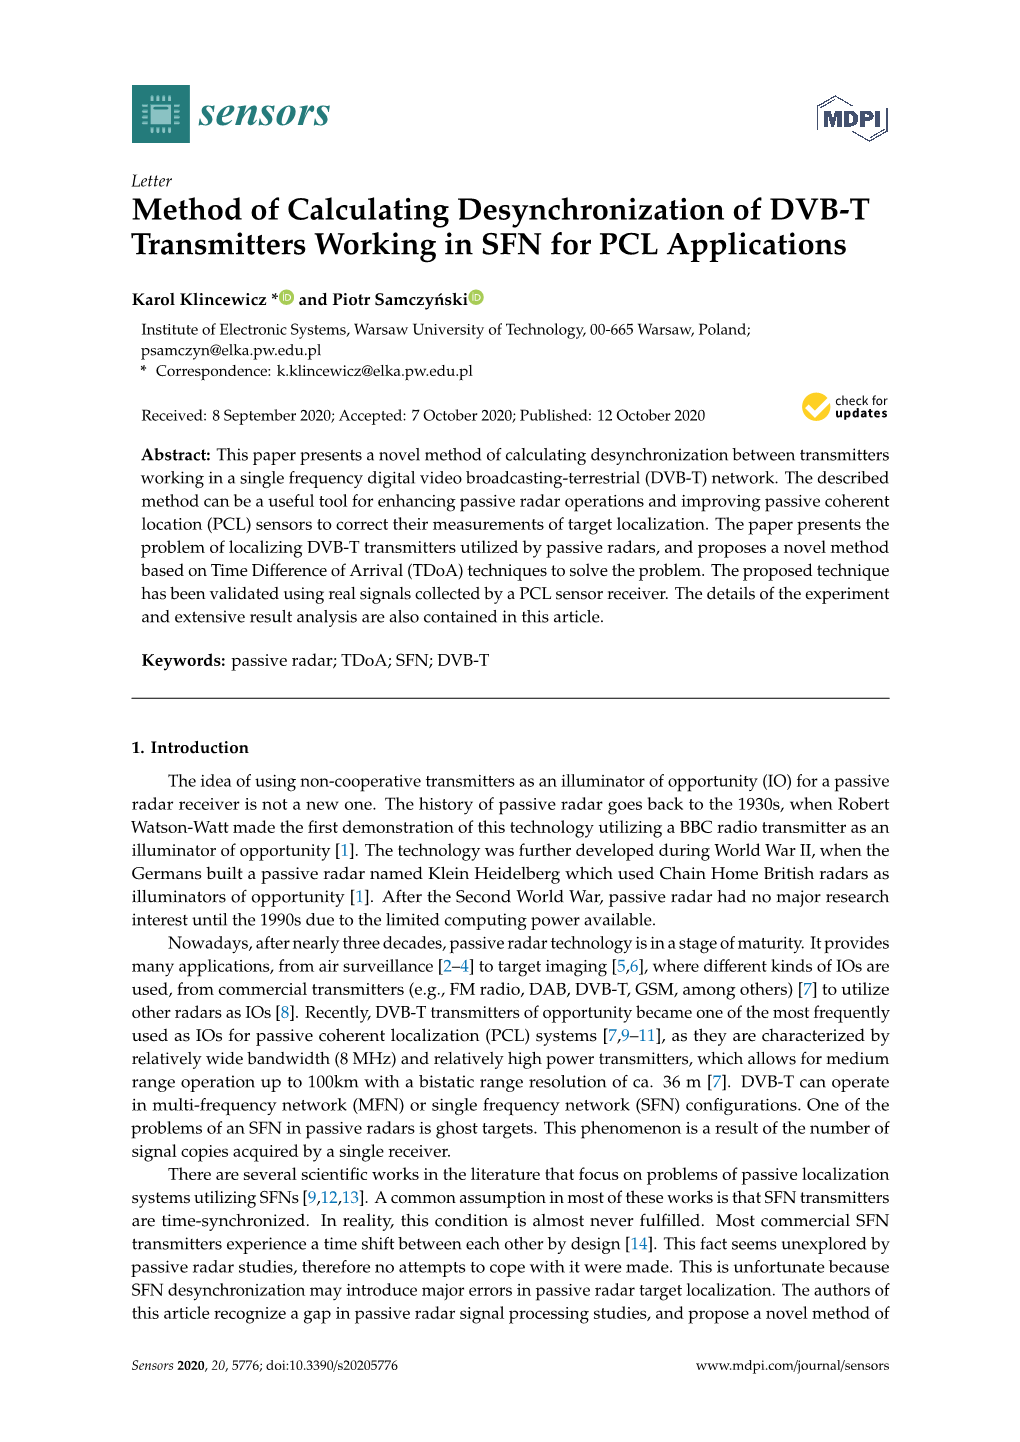 Method of Calculating Desynchronization of DVB-T Transmitters Working in SFN for PCL Applications